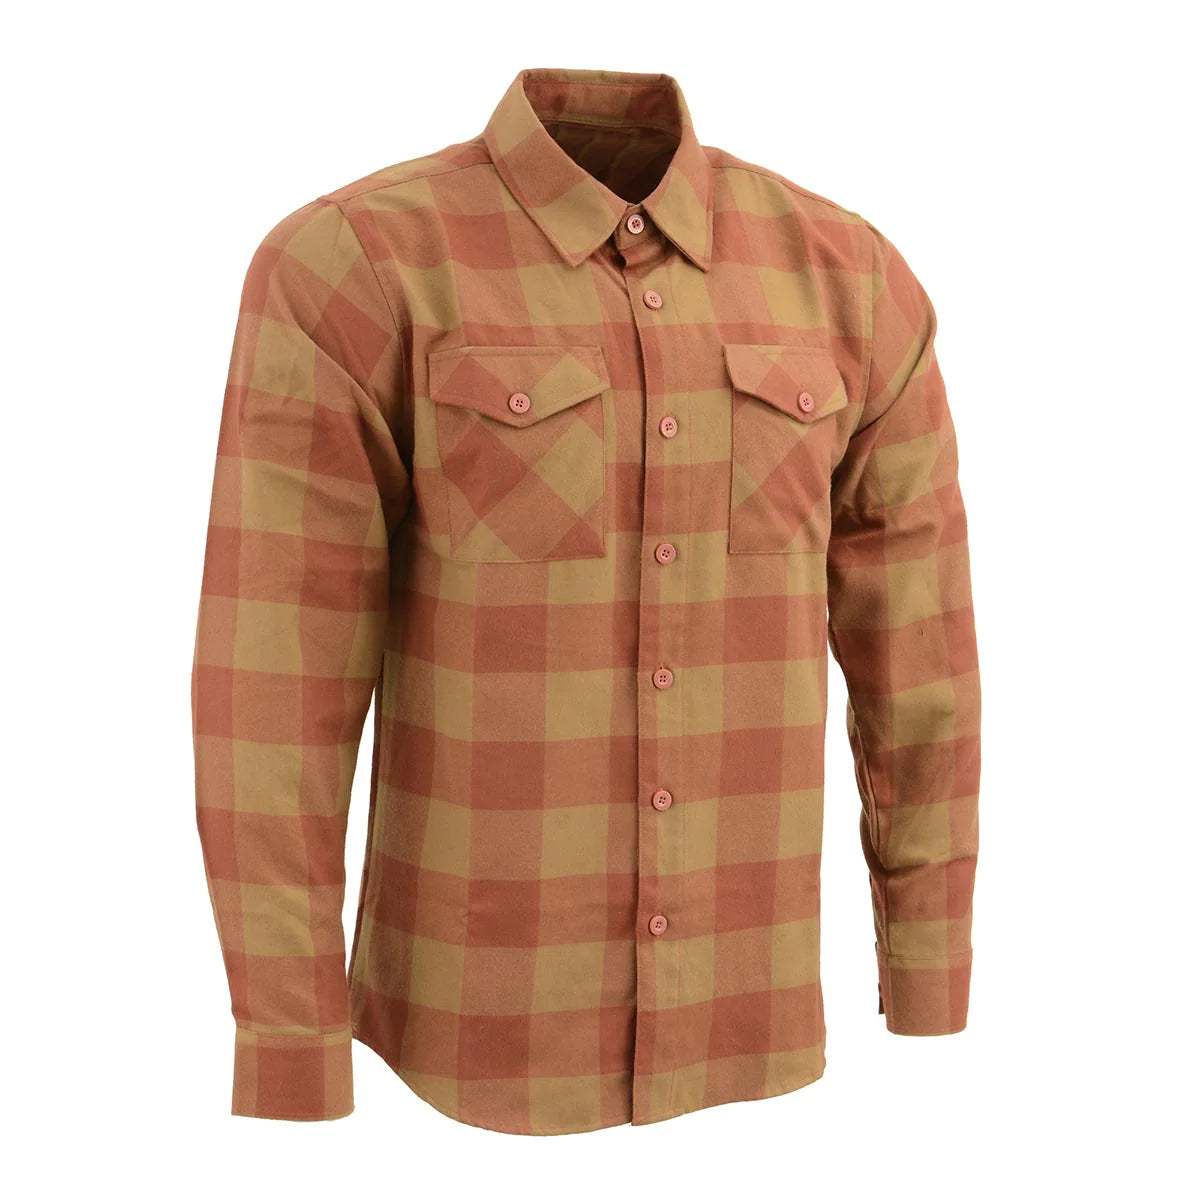 Men's Brown and Beige Long Sleeve Cotton Flannel Shirt